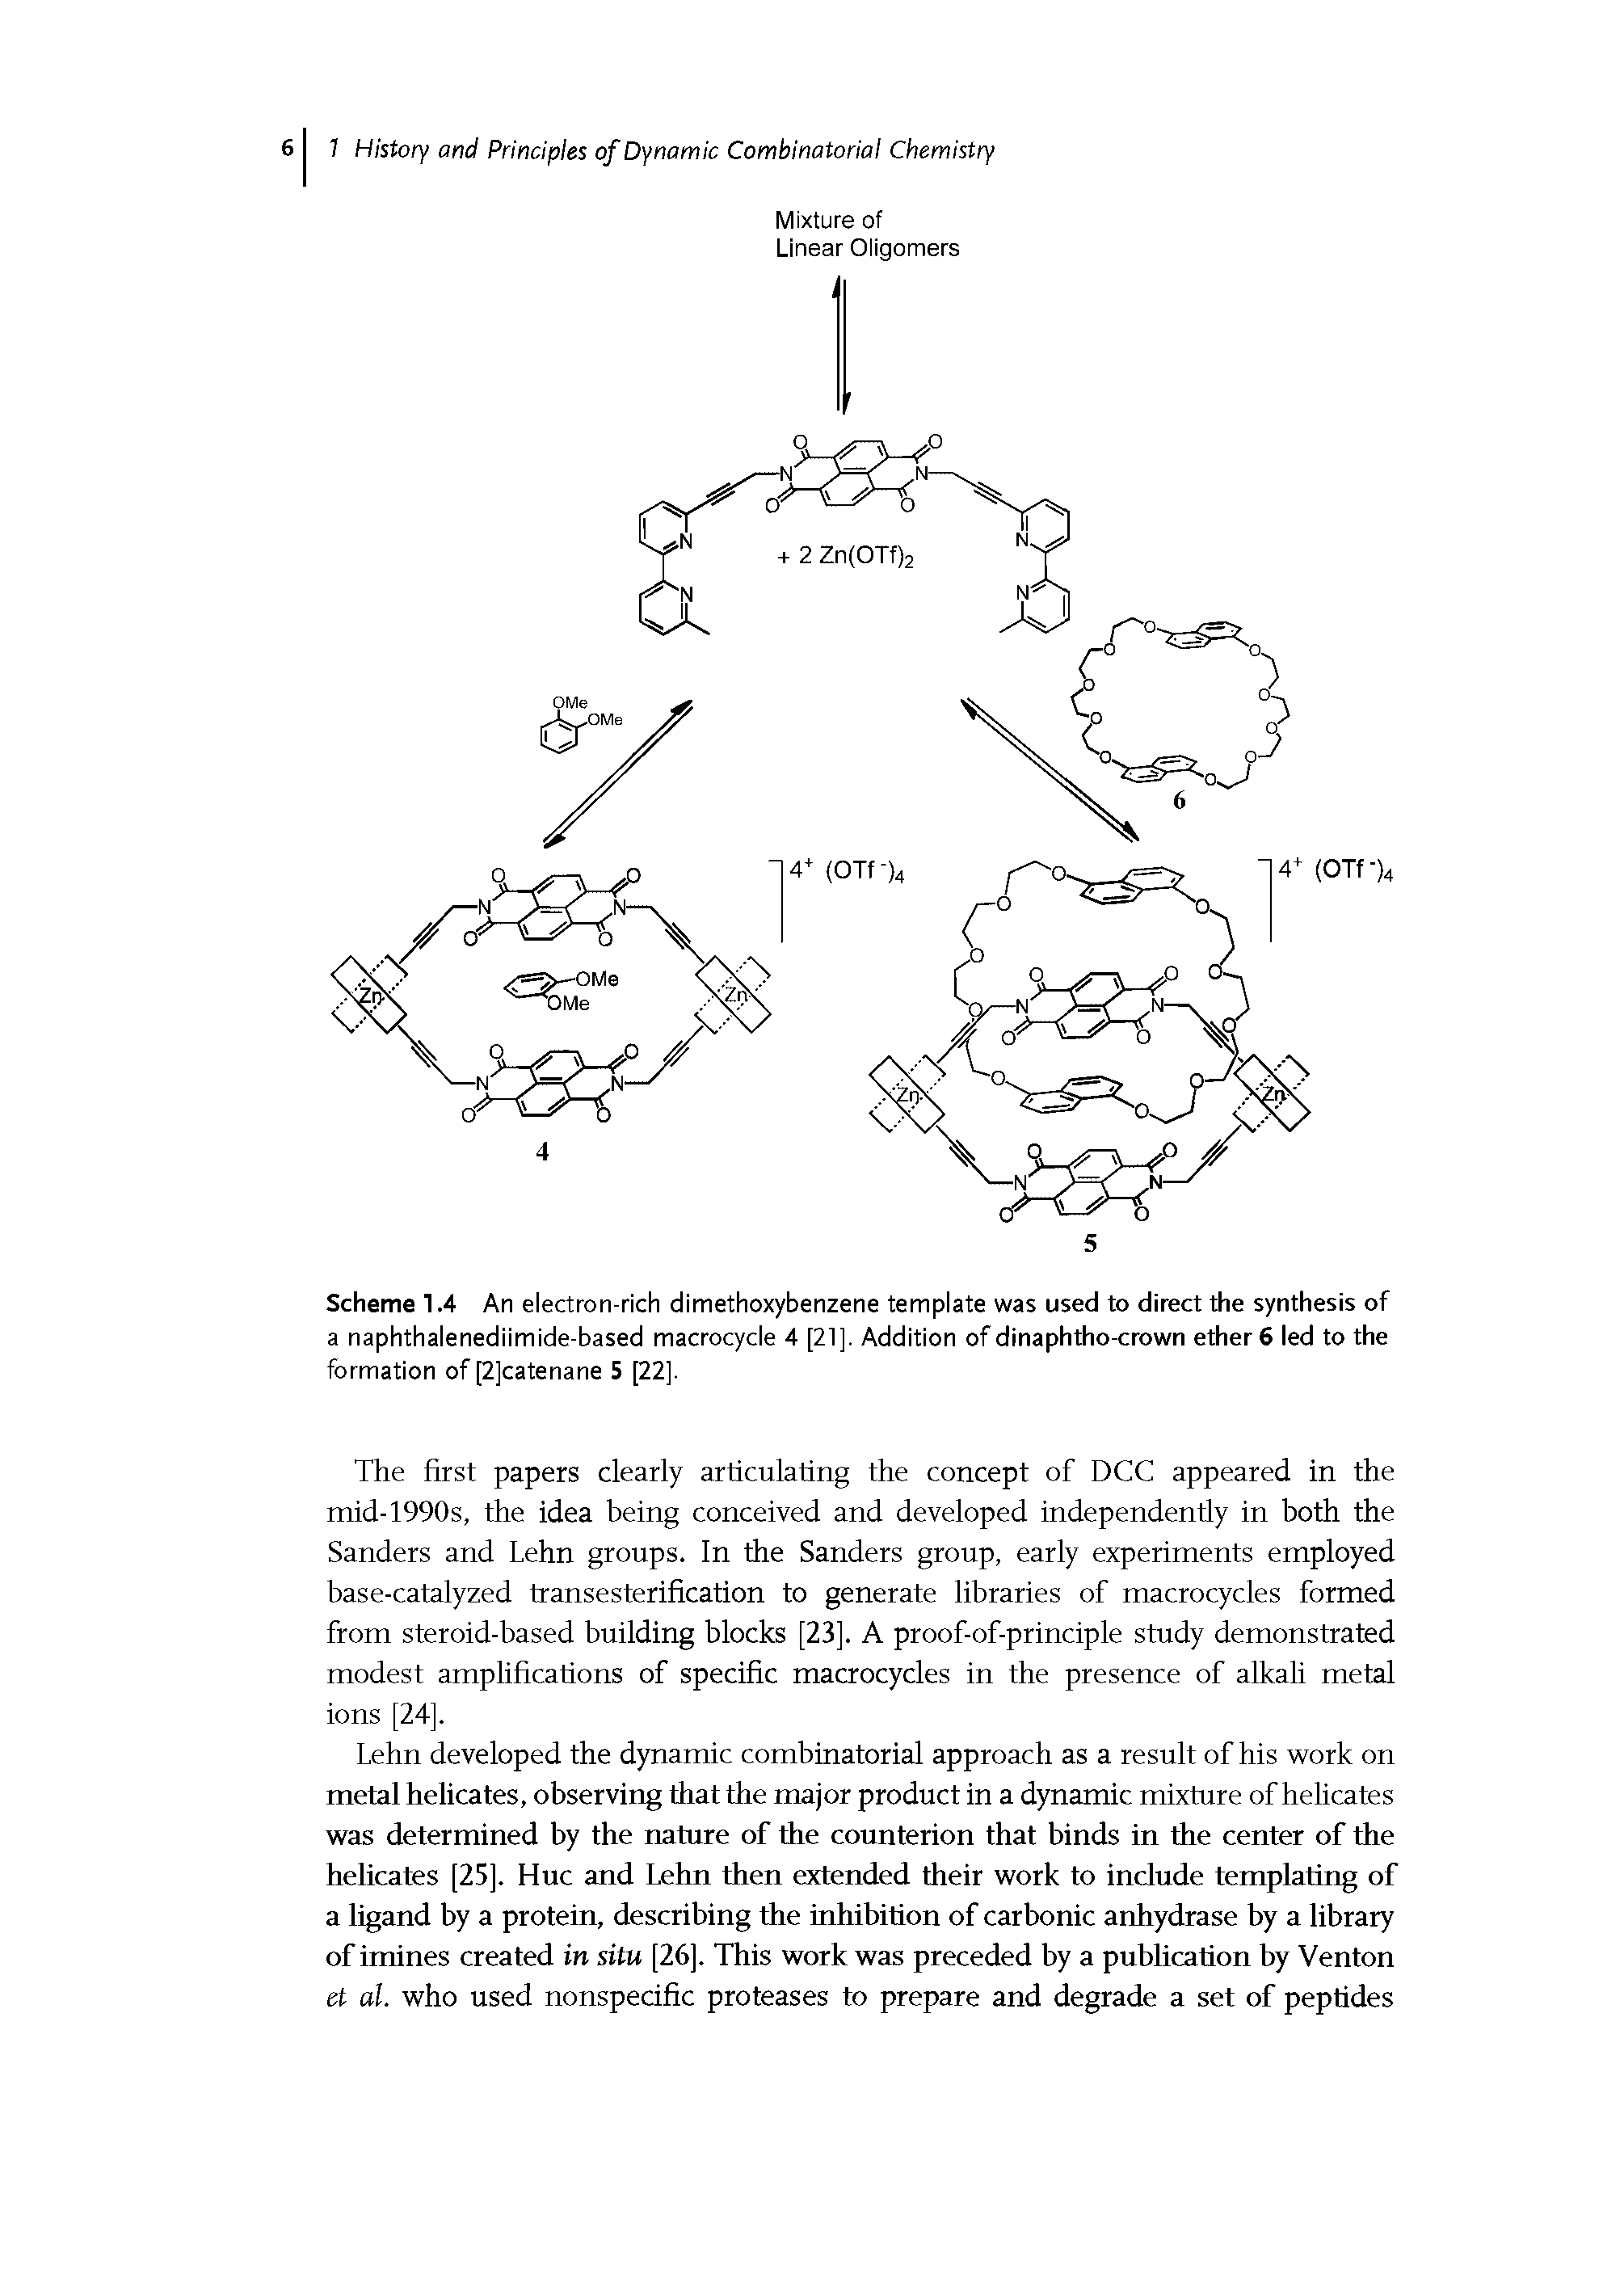 Scheme 1.4 An electron-rich dimethoxybenzene template was used to direct the synthesis of a naphthalenediimide-based macrocycle 4 [21]. Addition of dinaphtho-crown ether 6 led to the formation of [2]catenane 5 [22].